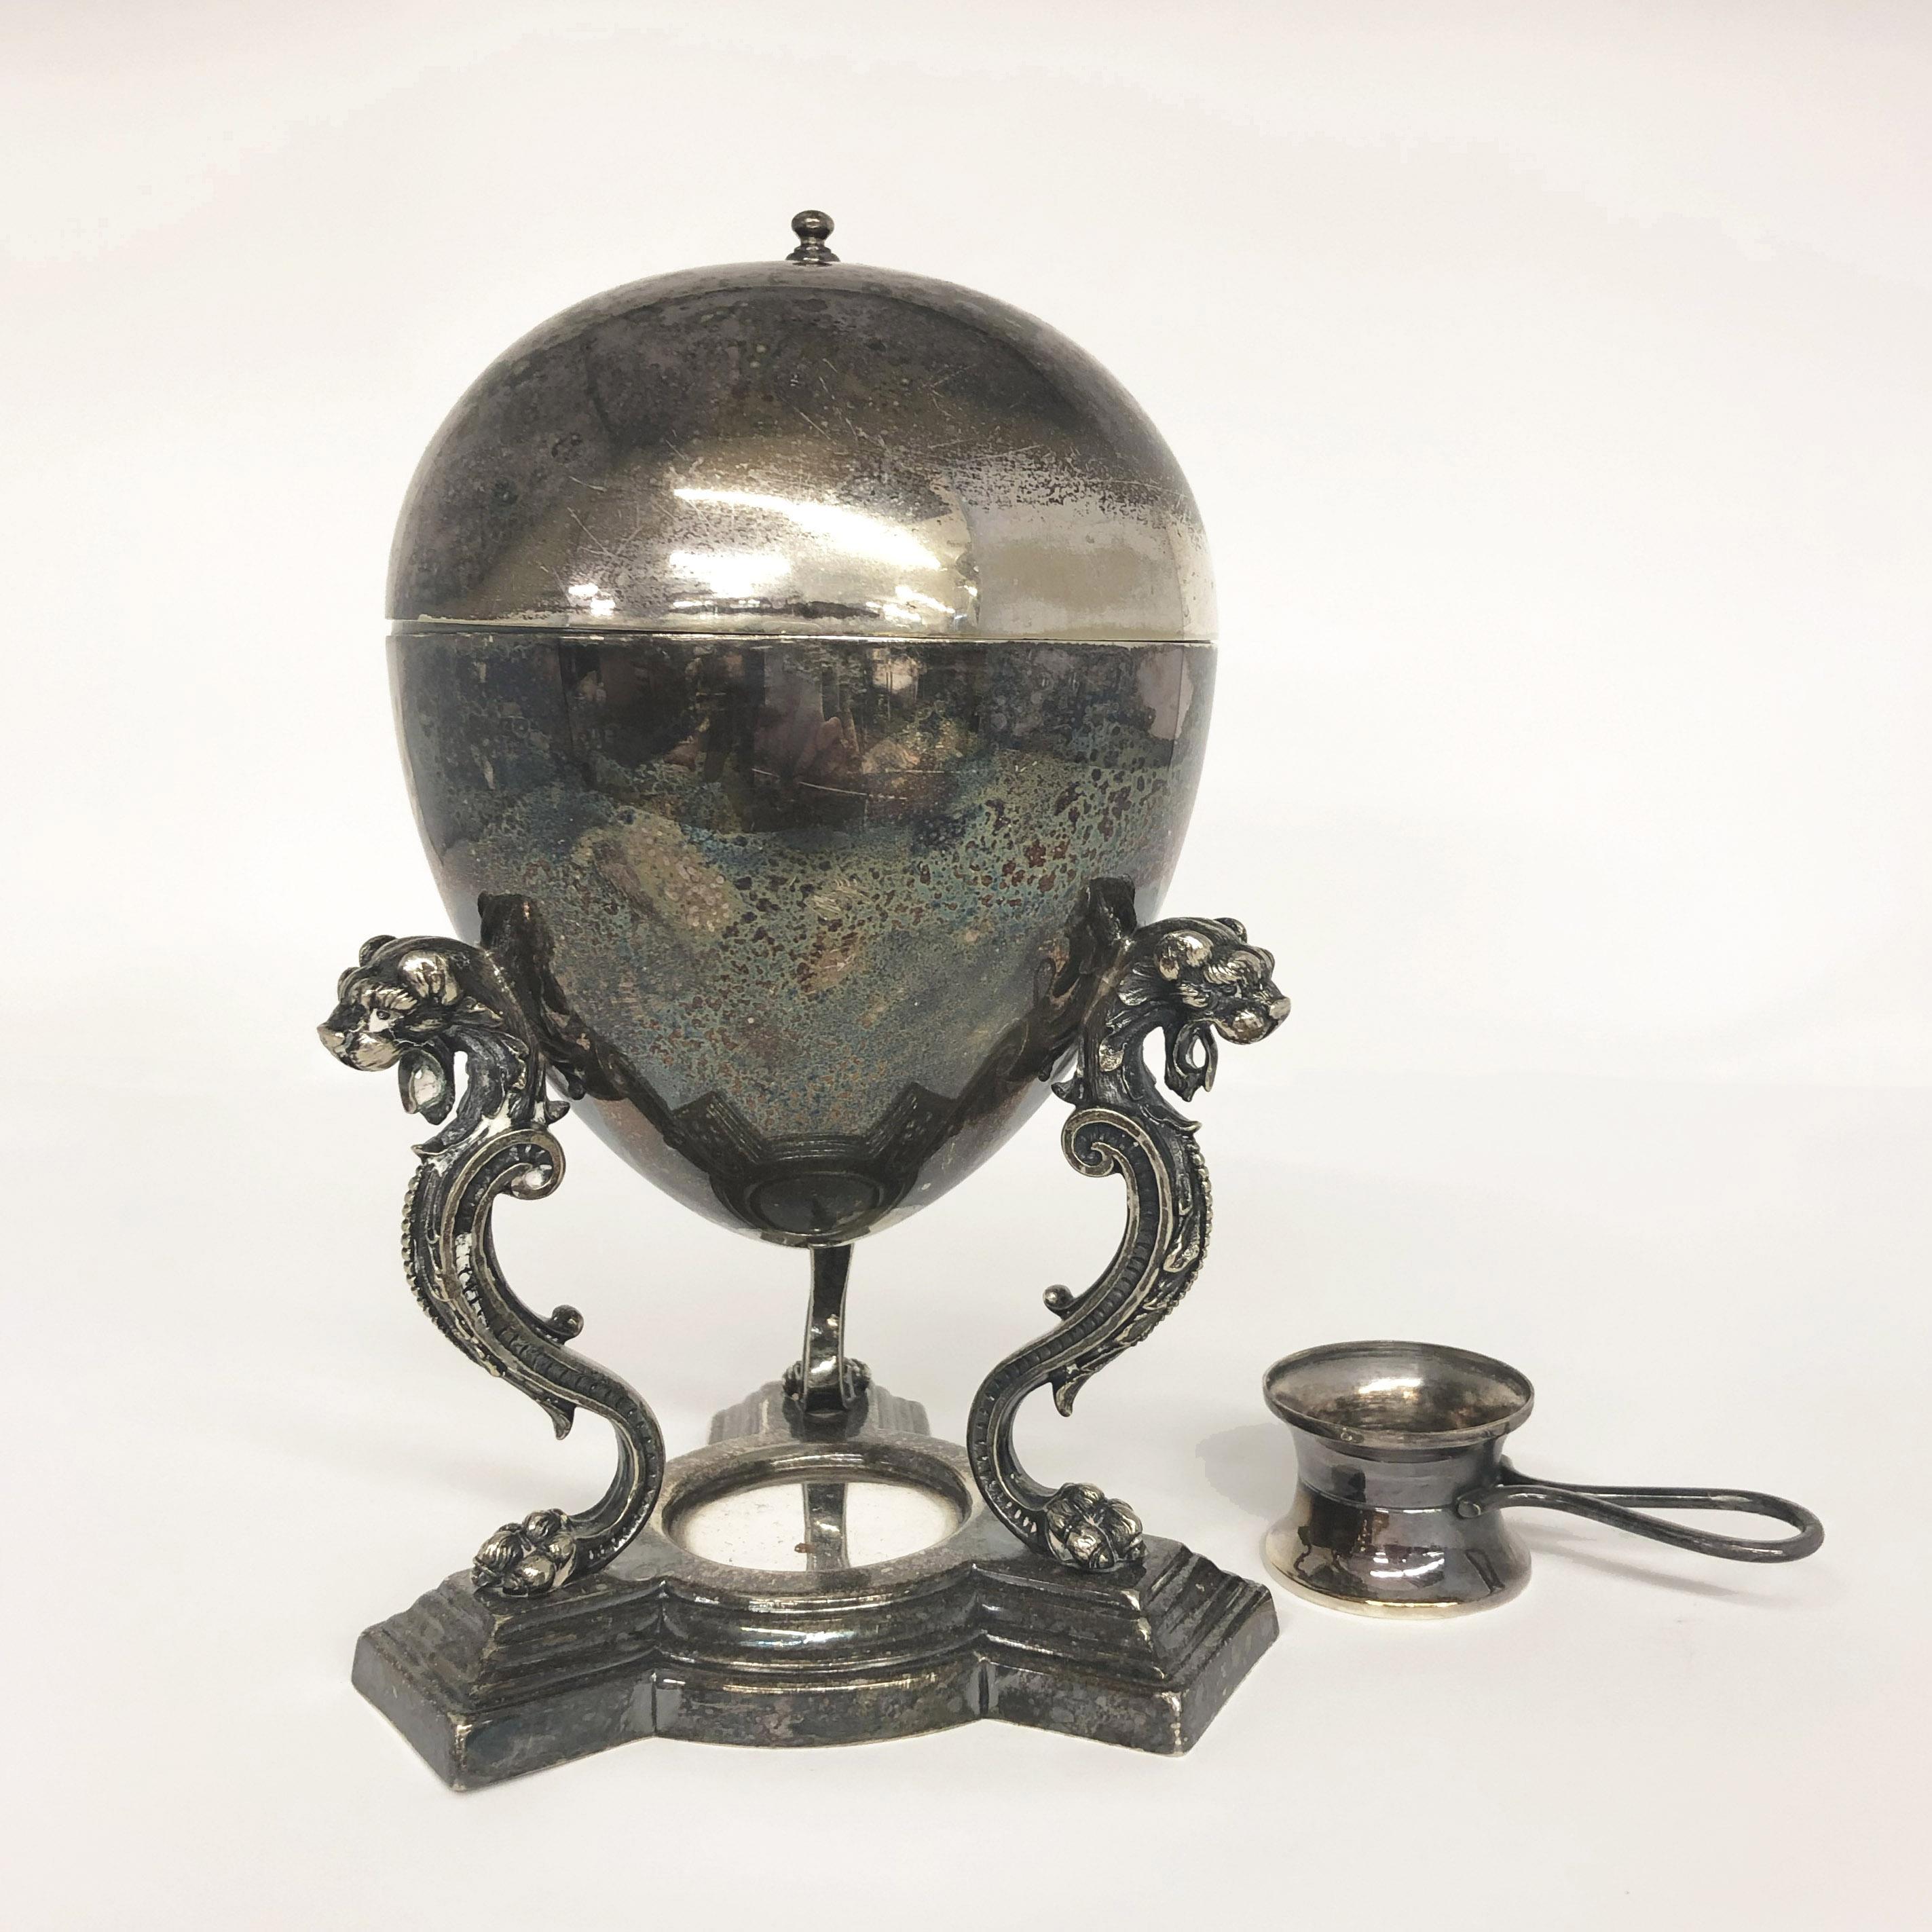 Vintage egg warmer, circa 1920, in silver plate, featuring three dragons on scrolled legs of the warmer base. Once a desirable table piece for elegant dining, eggs could be warmed at the table and served hot and fresh to diners. A burner sits